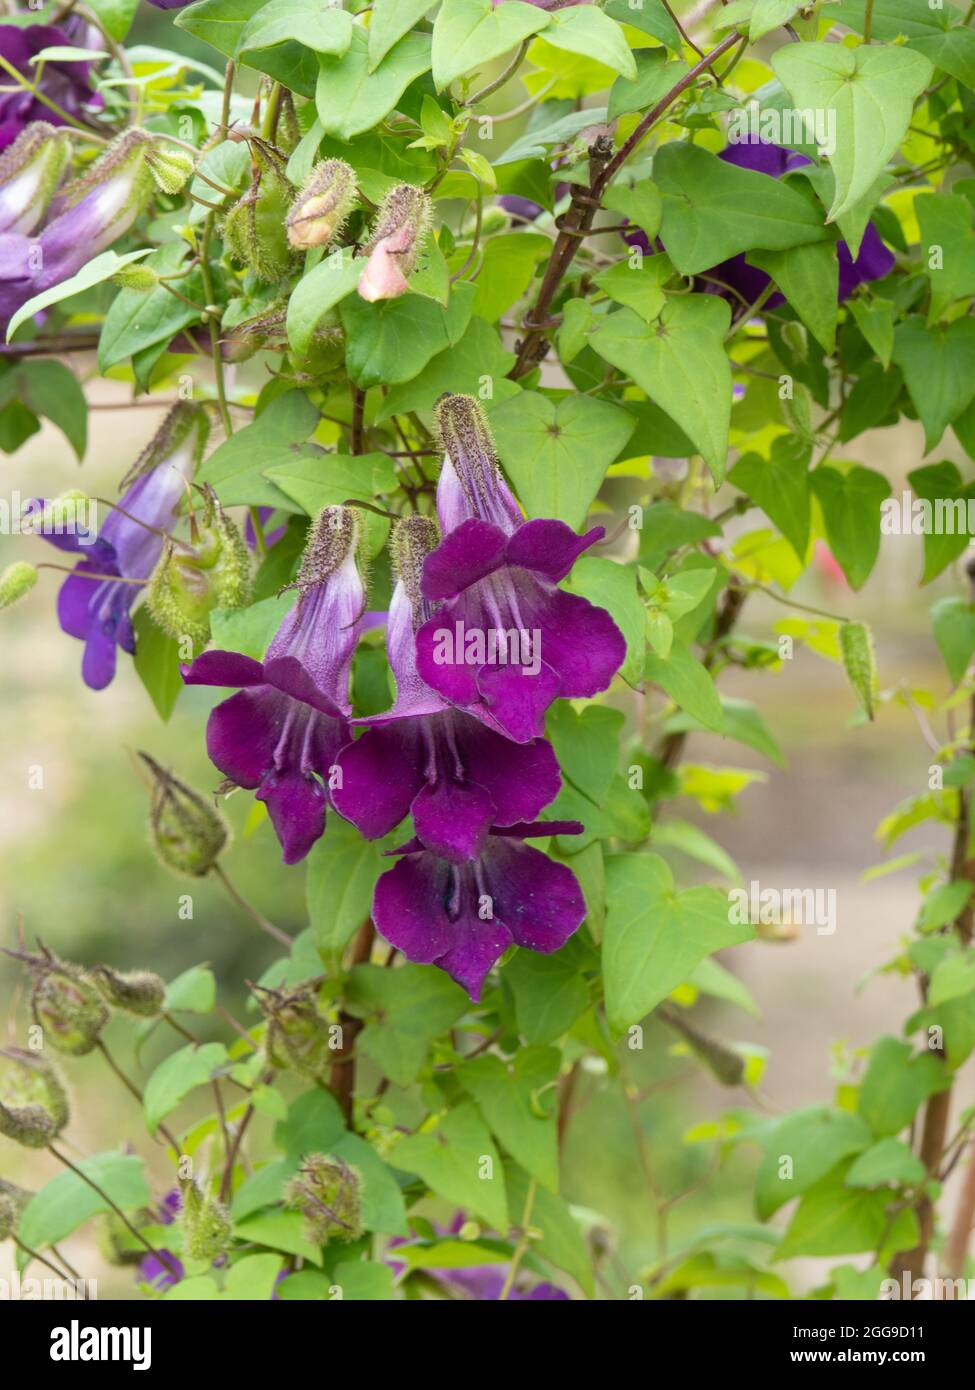 A group of the purple flowers of the climbing snapdragon Asarina scandens Stock Photo